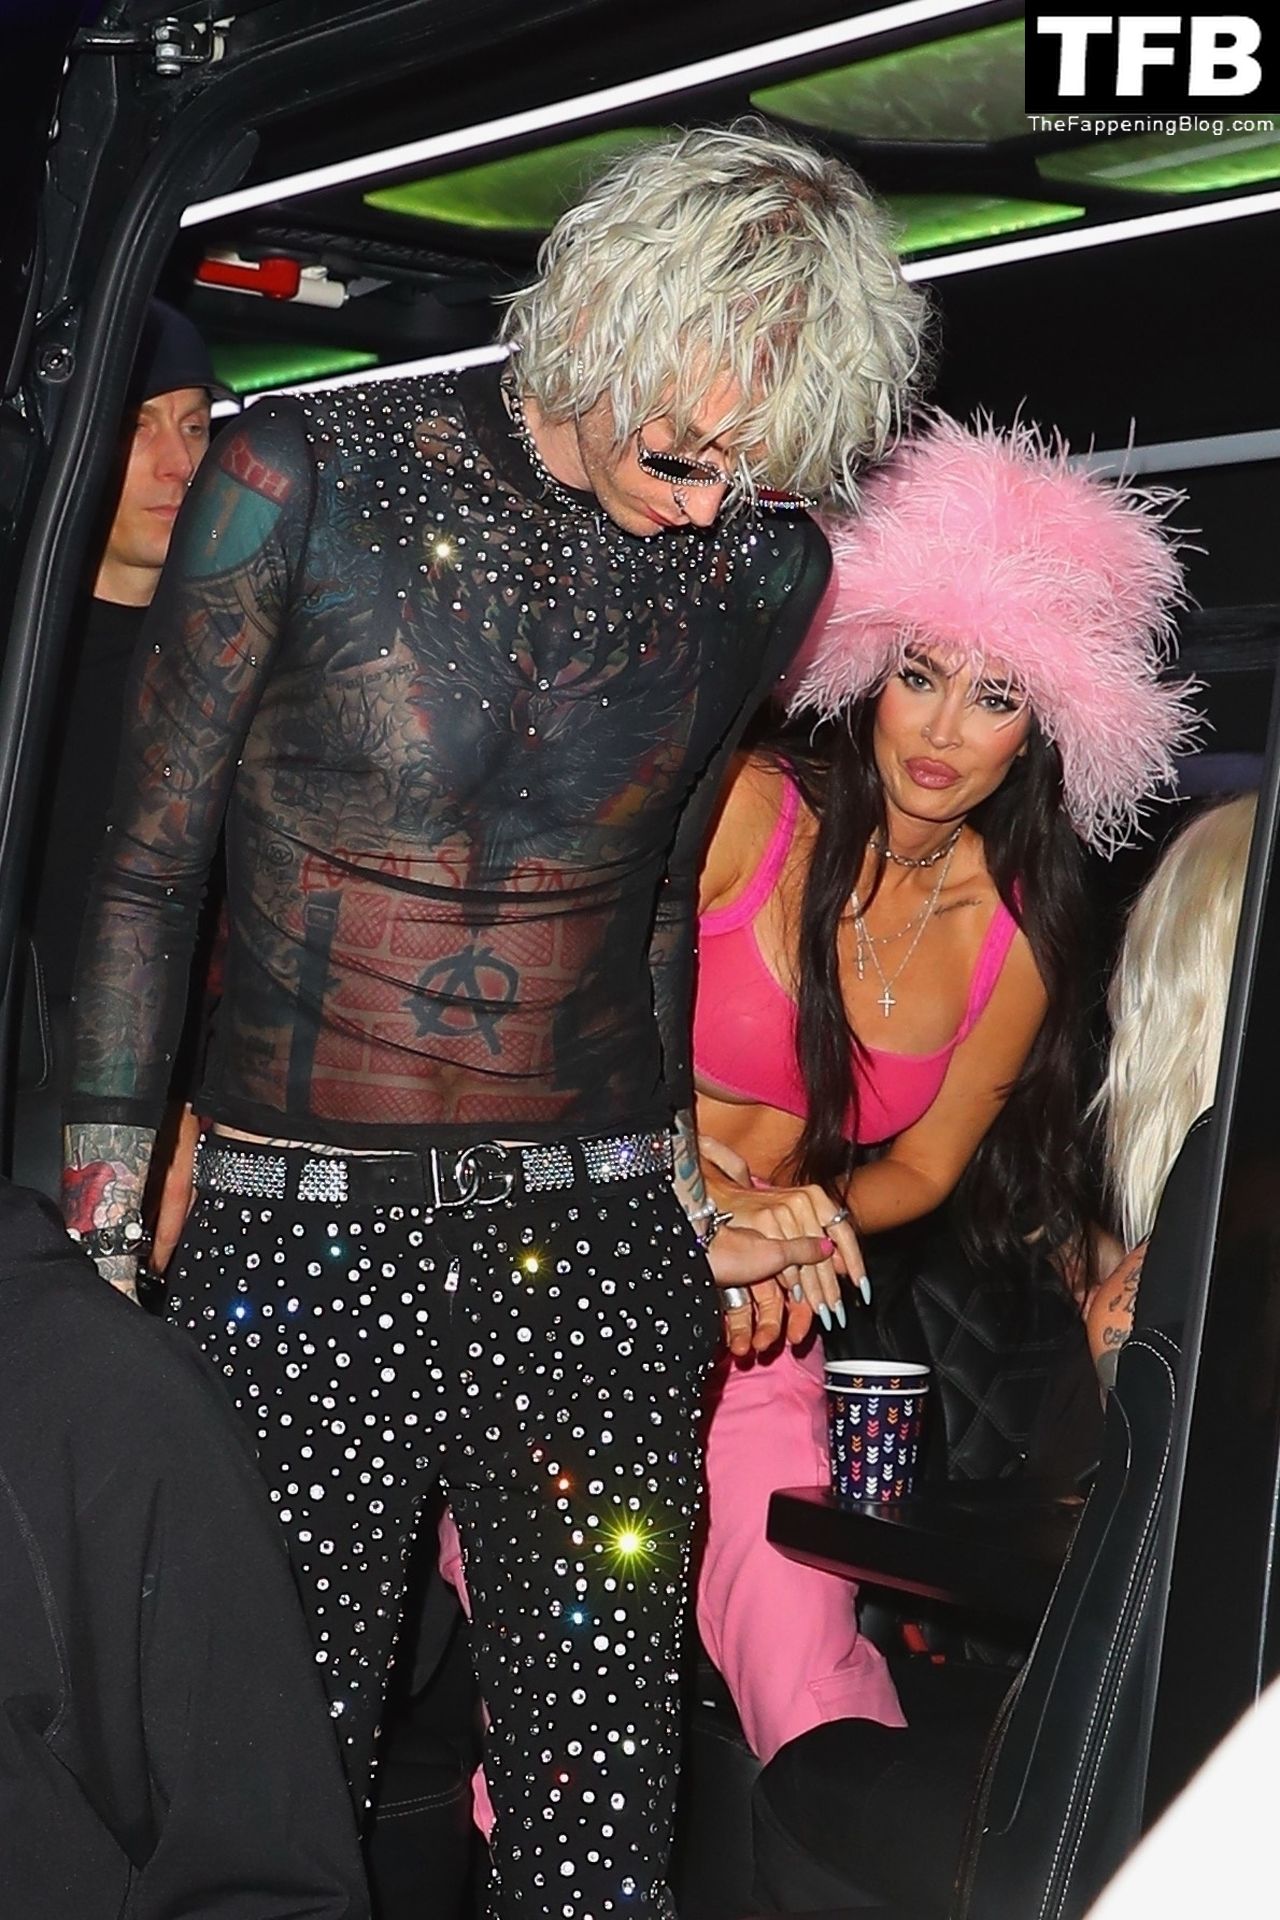 MGK Arrives For His Art Basel Performance at E11even Nightclub with Megan Fox (31 Photos)